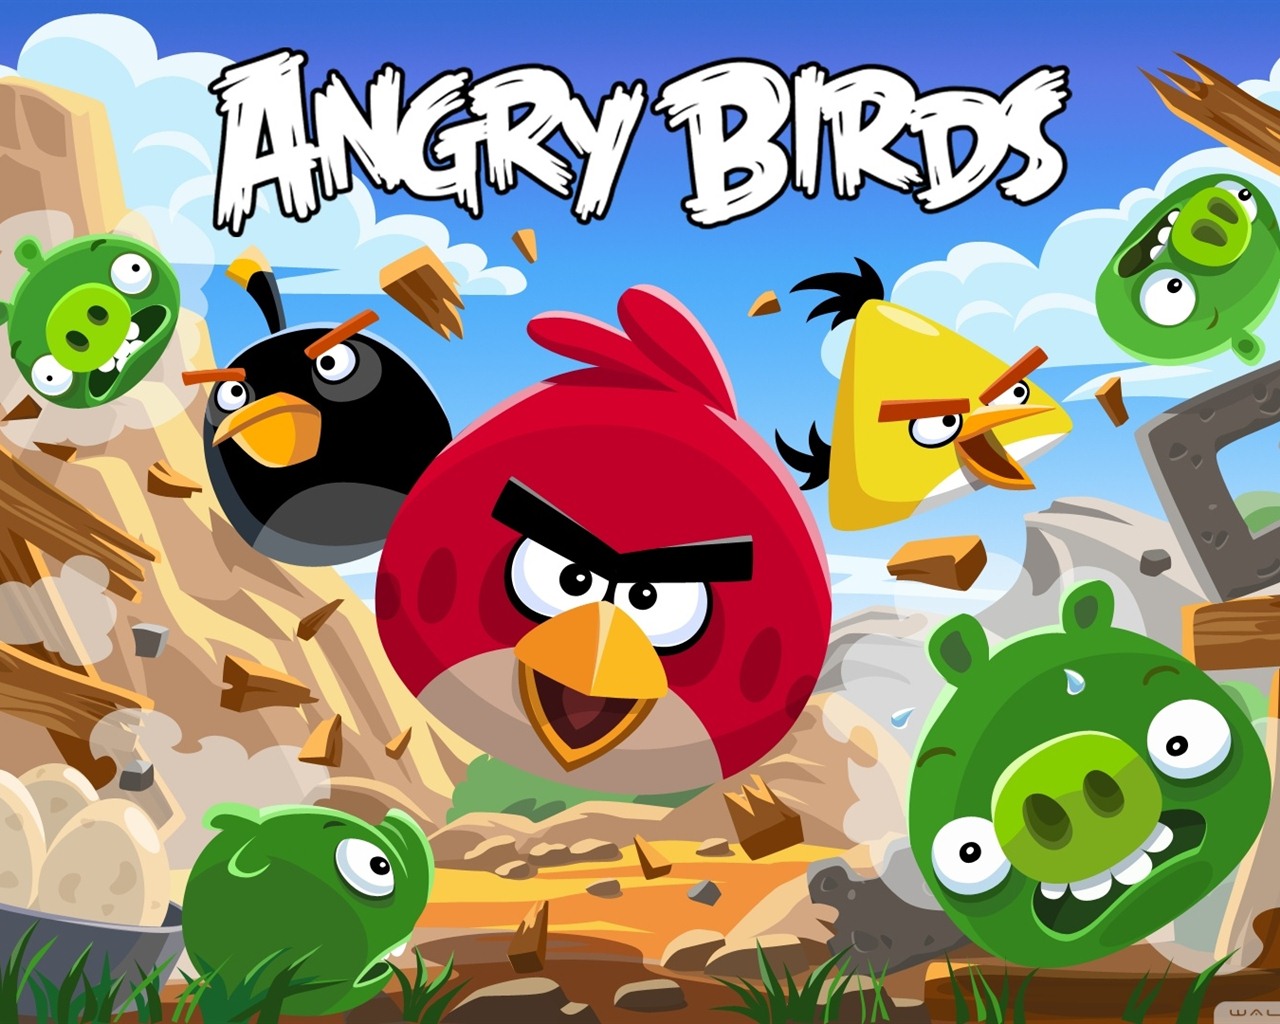 Angry Birds Game Wallpapers #10 - 1280x1024